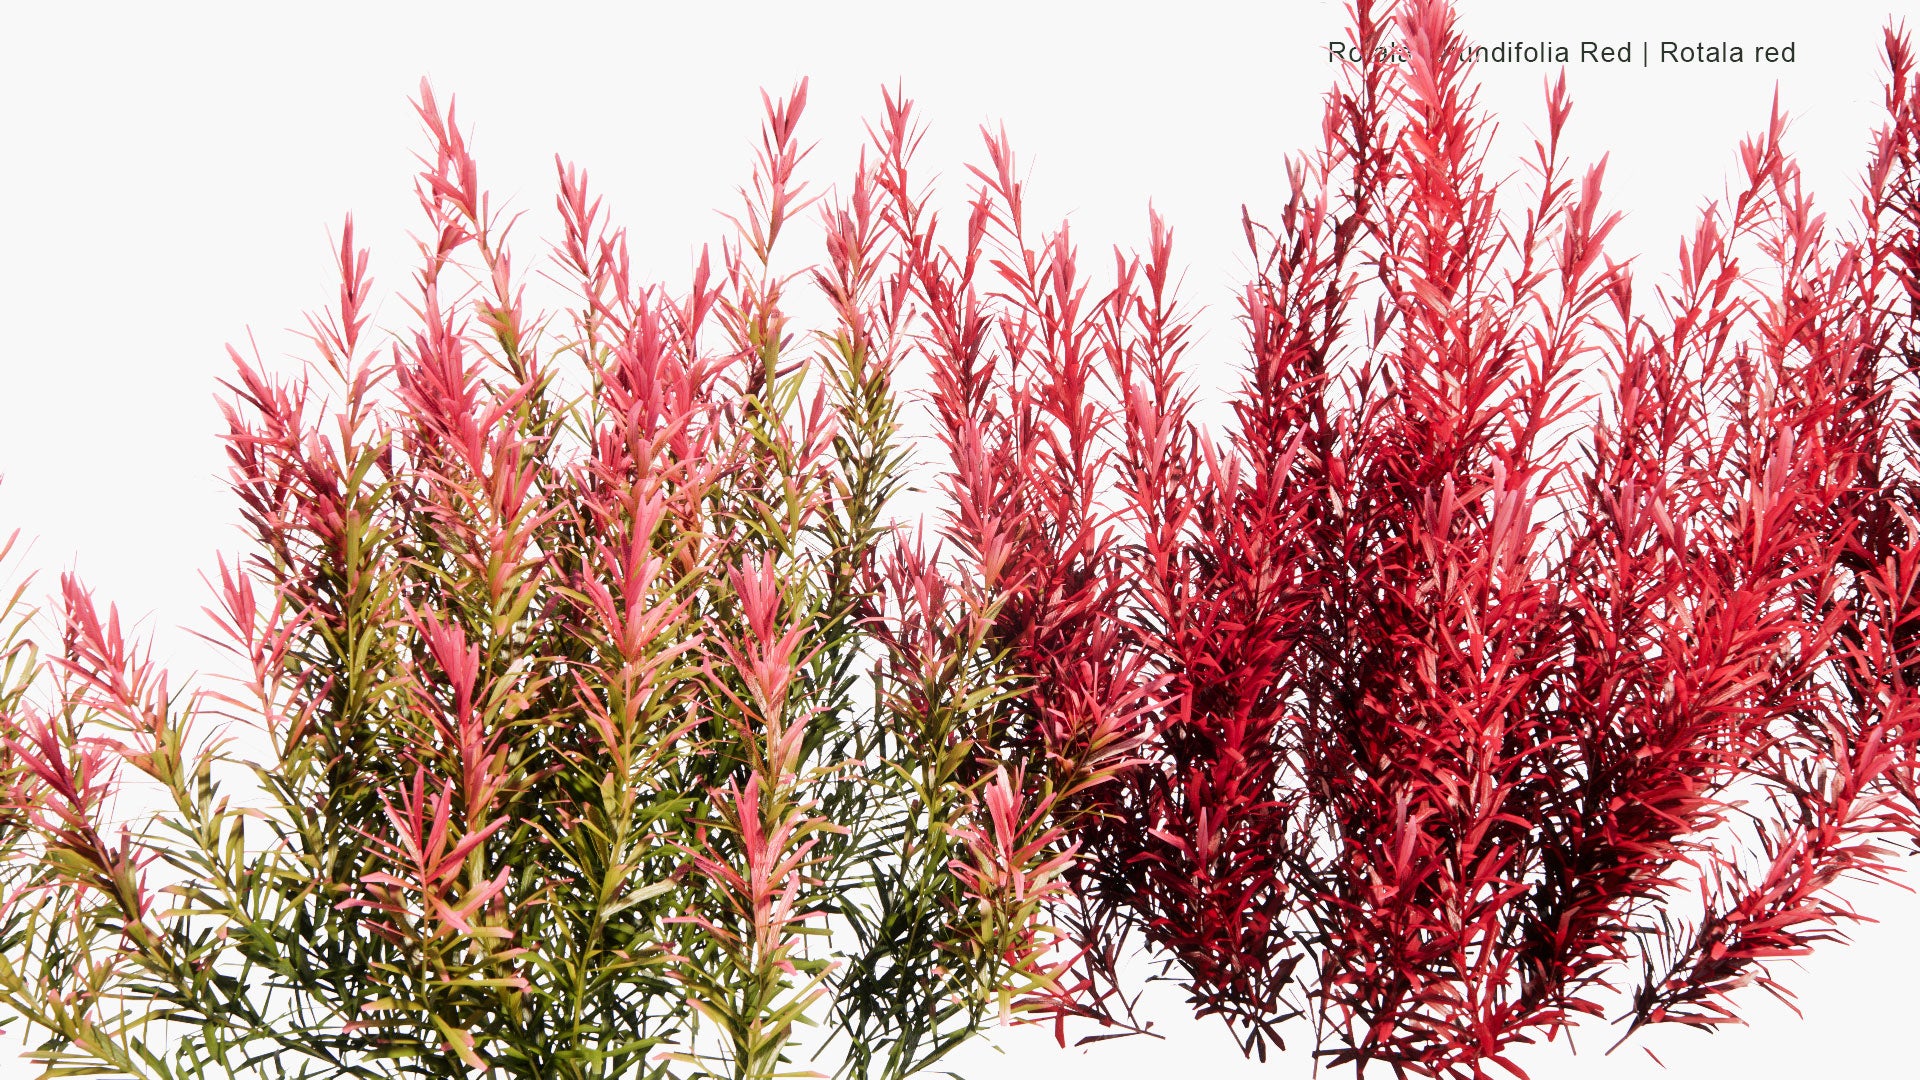 Low Poly Rotala Rotundifolia 'Red' - Rotala Red (3D Model)